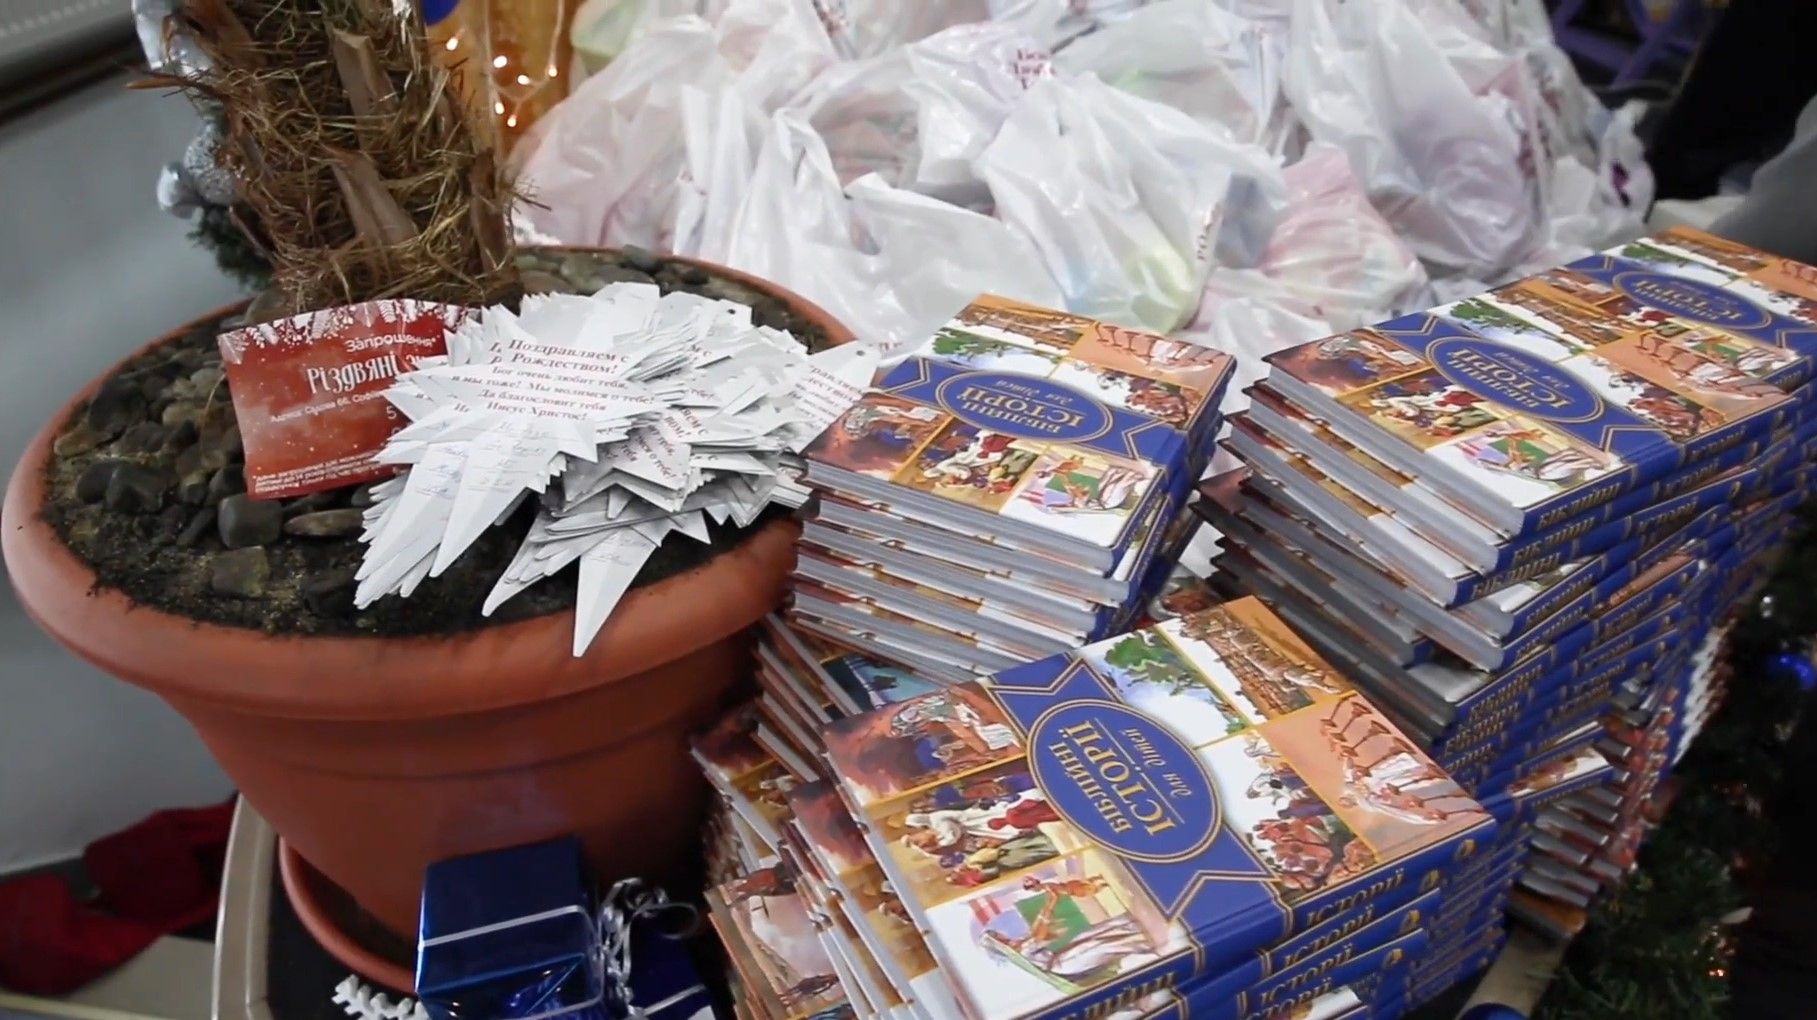 Slavic Gospel Association is on target to distribute Christmas gifts, children’s Bibles, & personalized ornaments to 50000 Children in Russia